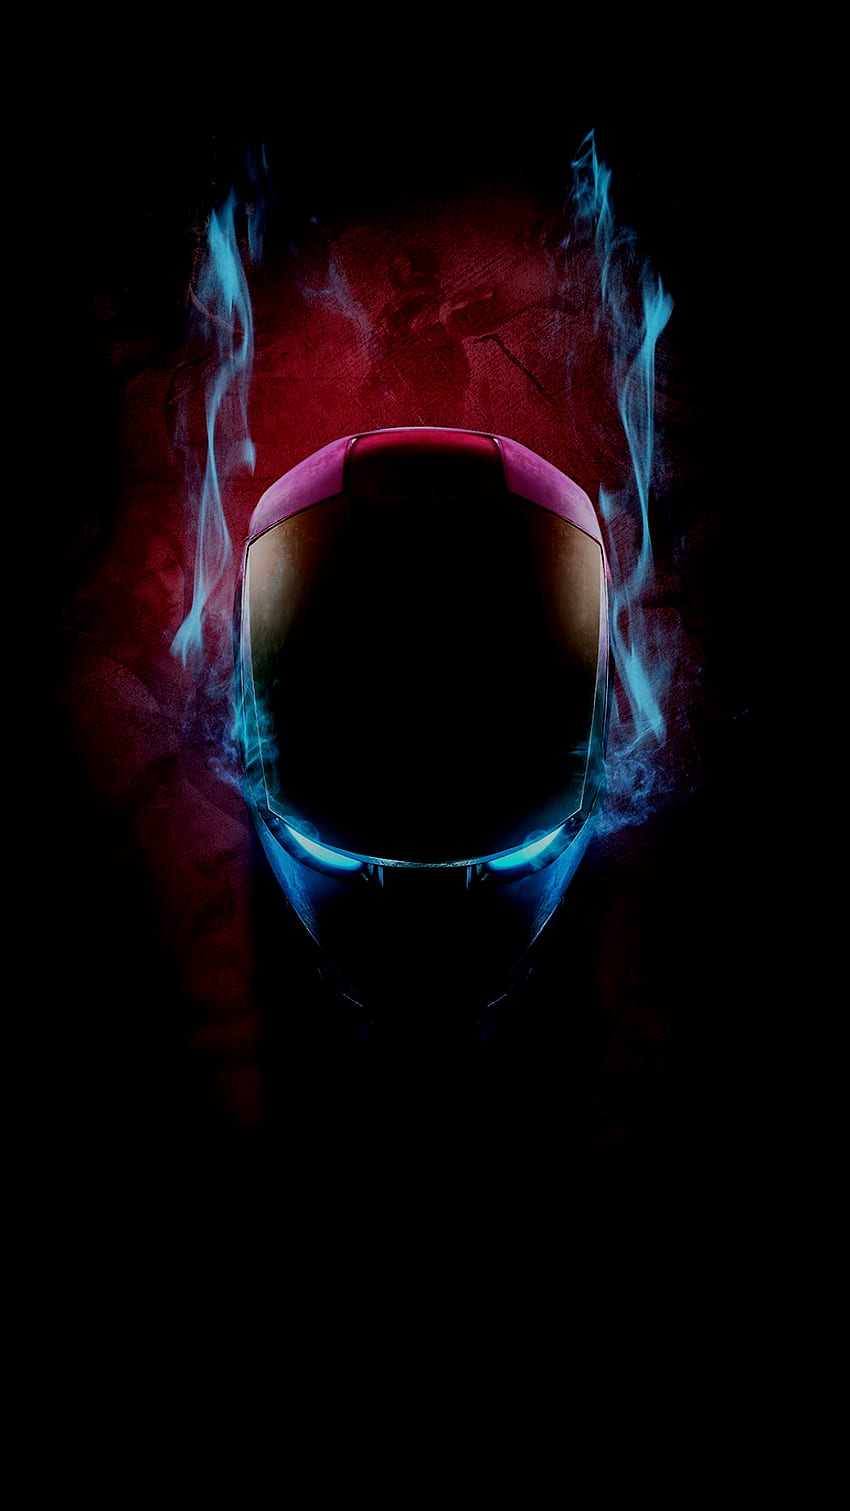 Took BossLogic's post and tried to turn it into an AMOLED, Iron Man OLED HD phone wallpaper